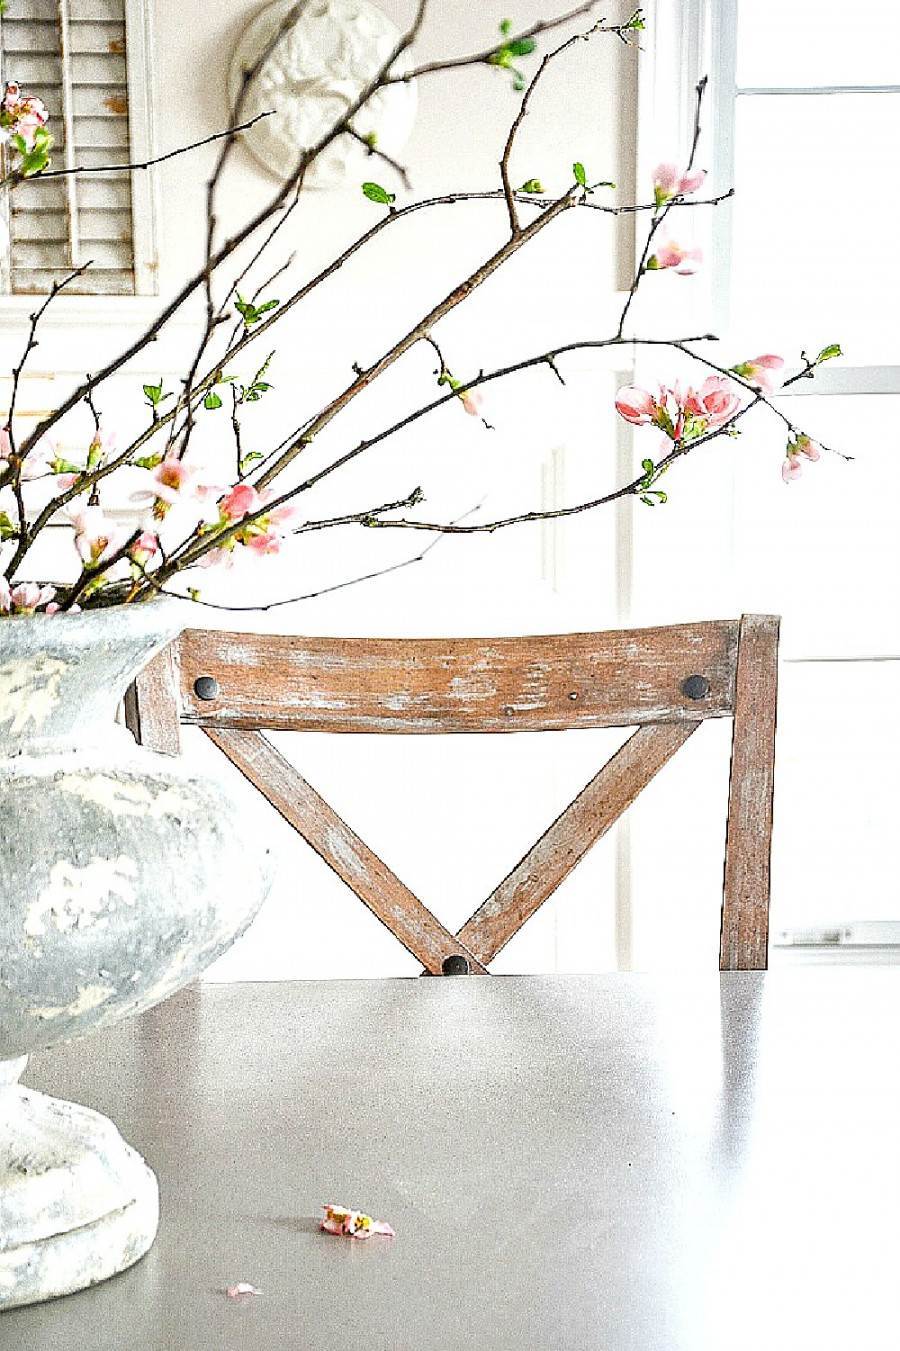 Forcing Spring branches In Your Home